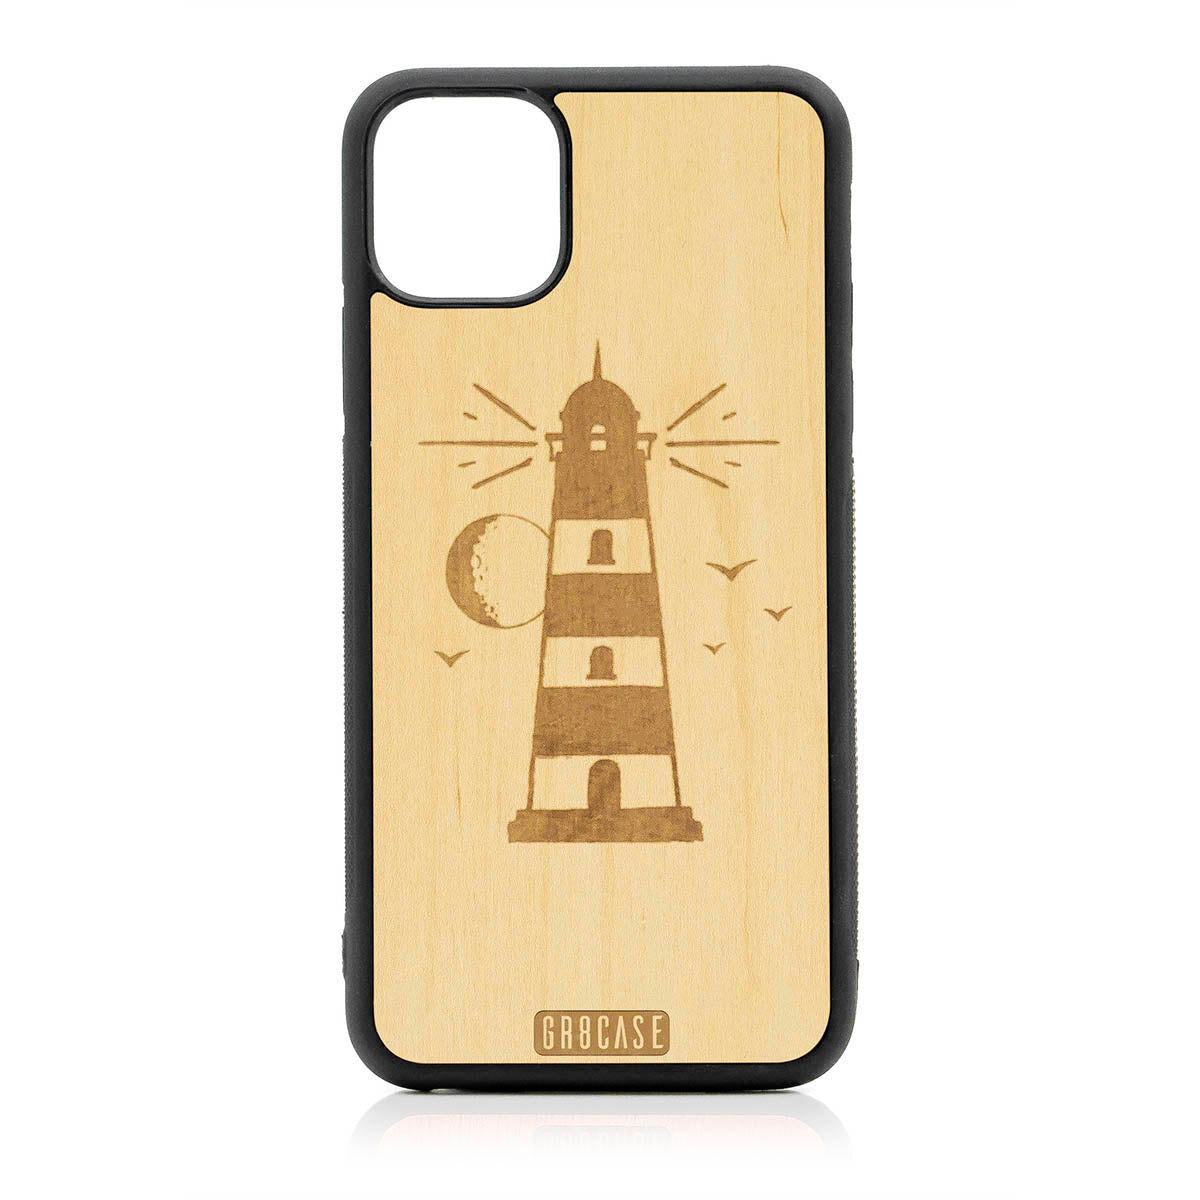 Midnight Lighthouse Design Wood Case For iPhone 11 Pro Max